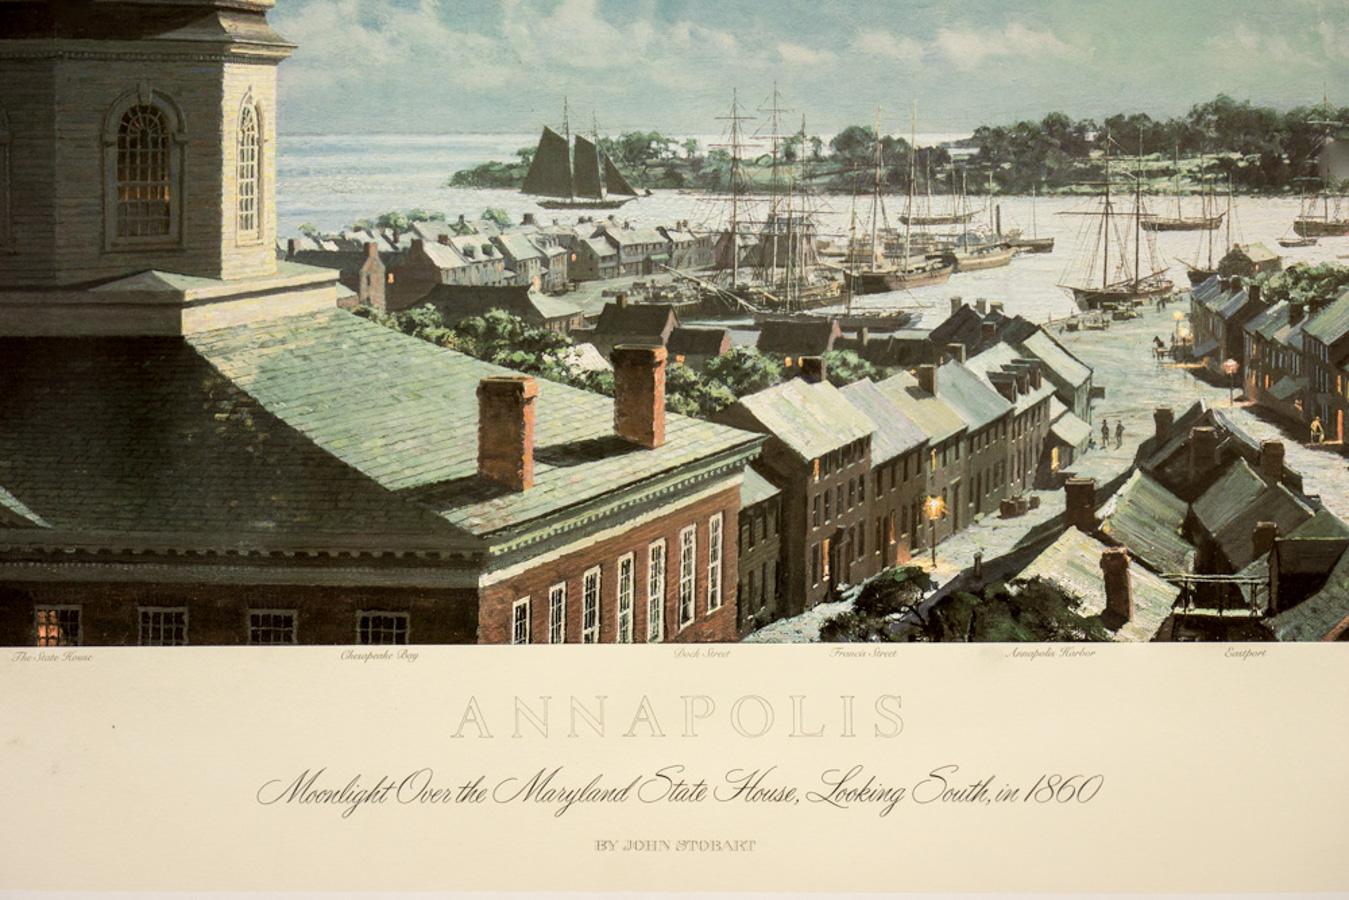 Annapolis. Moonlight Over the Maryland State House, Looking South, in 1860 - Beige Print by John Stobart